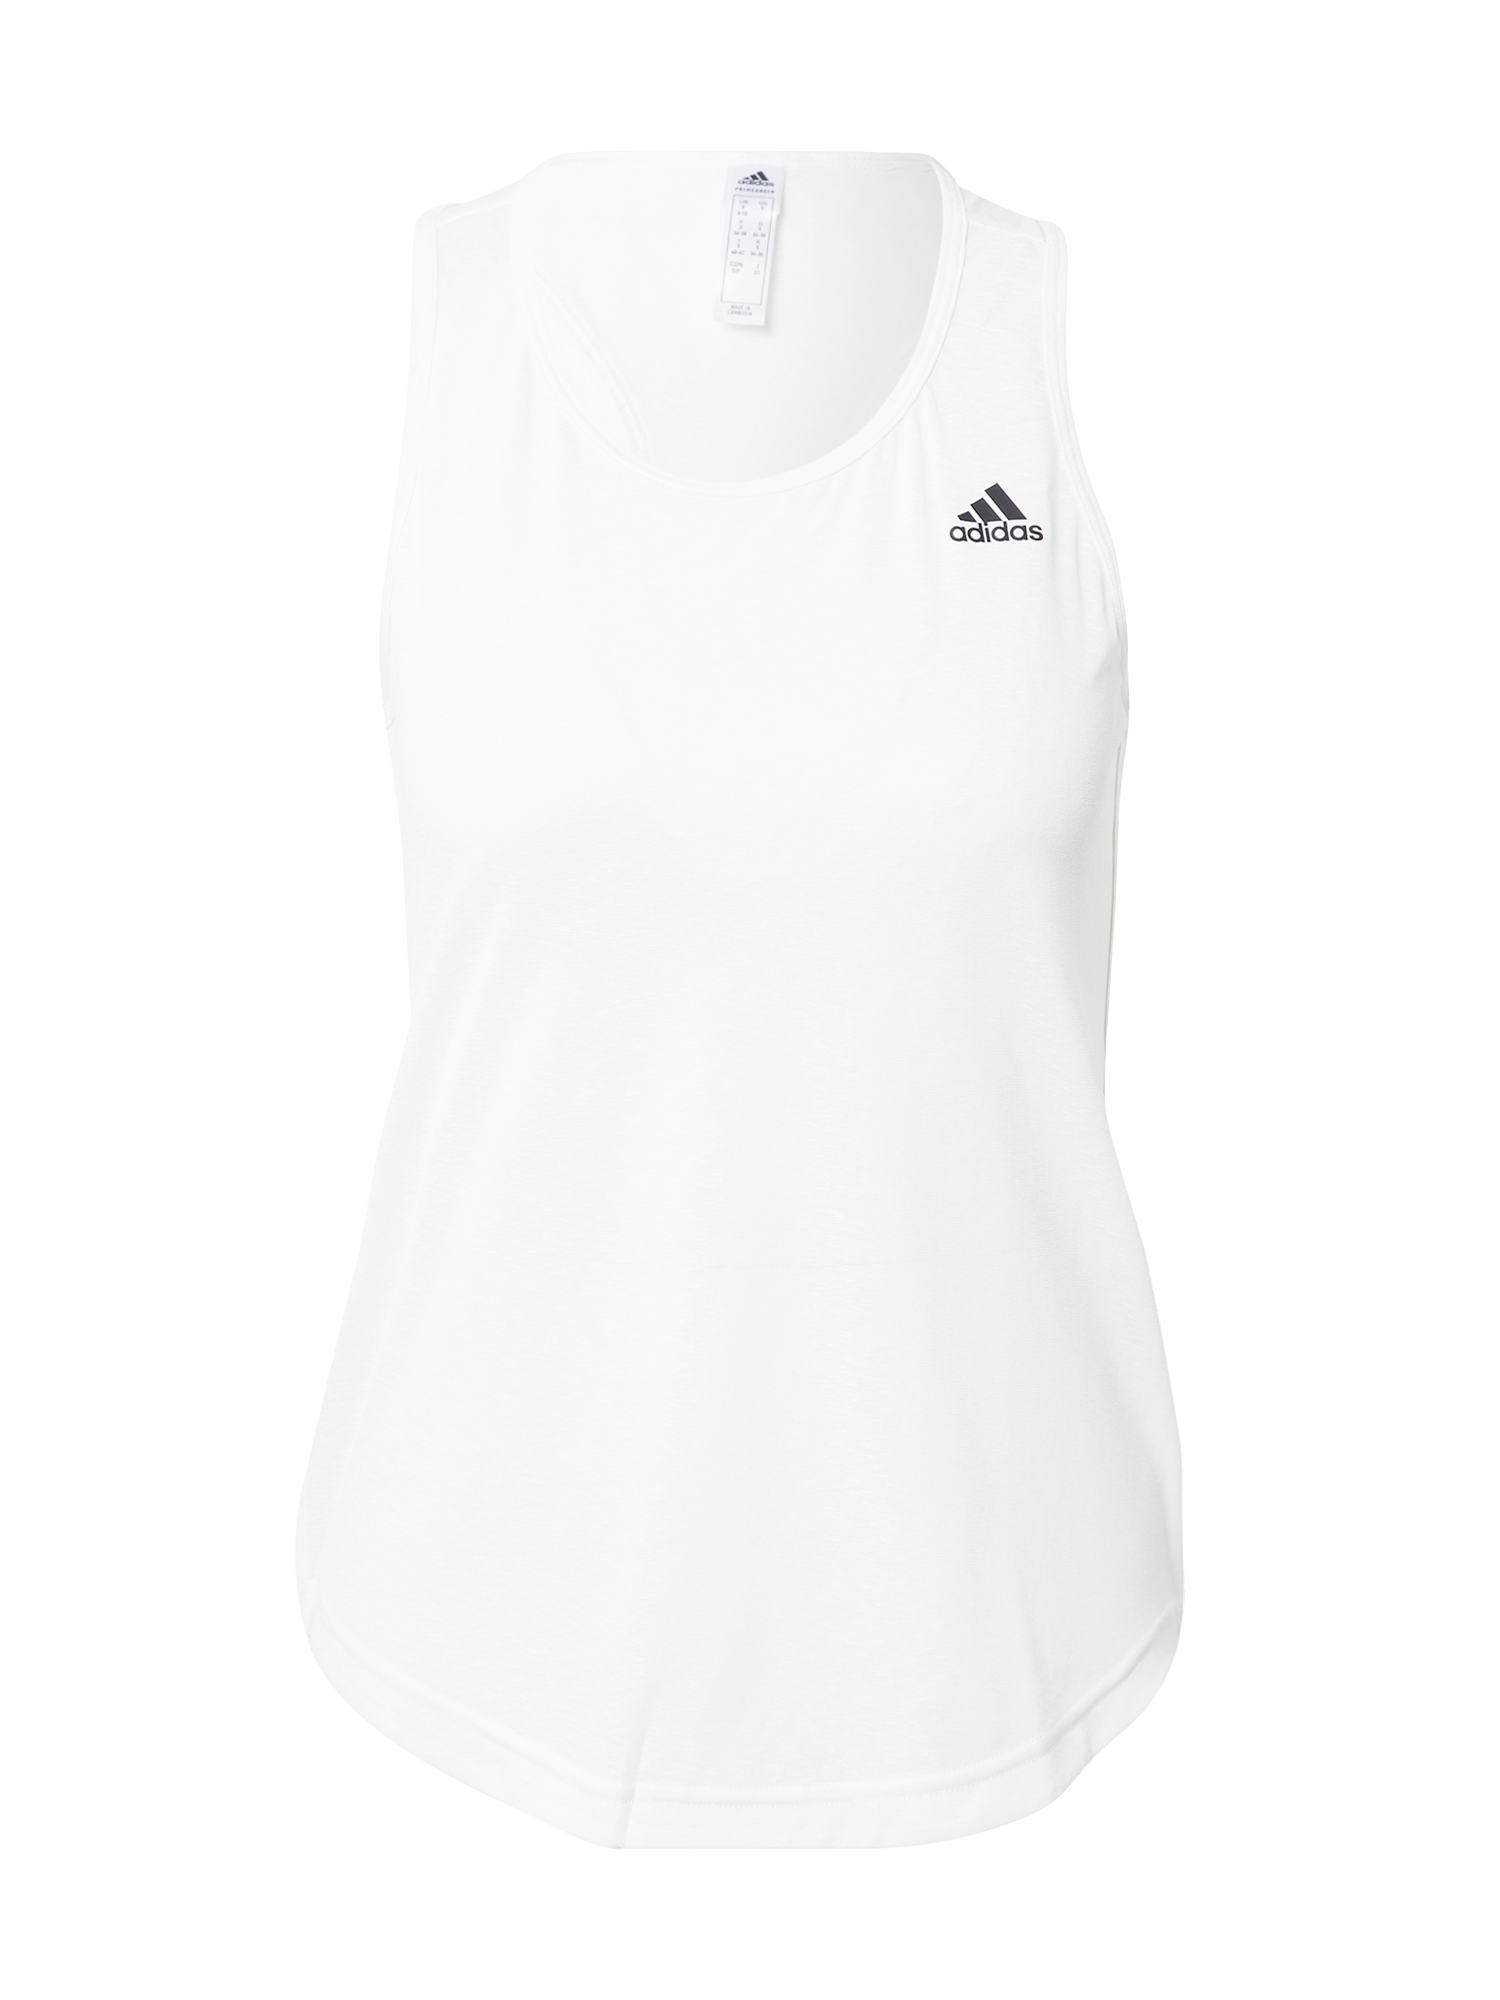 PROMO Donna ADIDAS PERFORMANCE Top sportivo in Bianco 